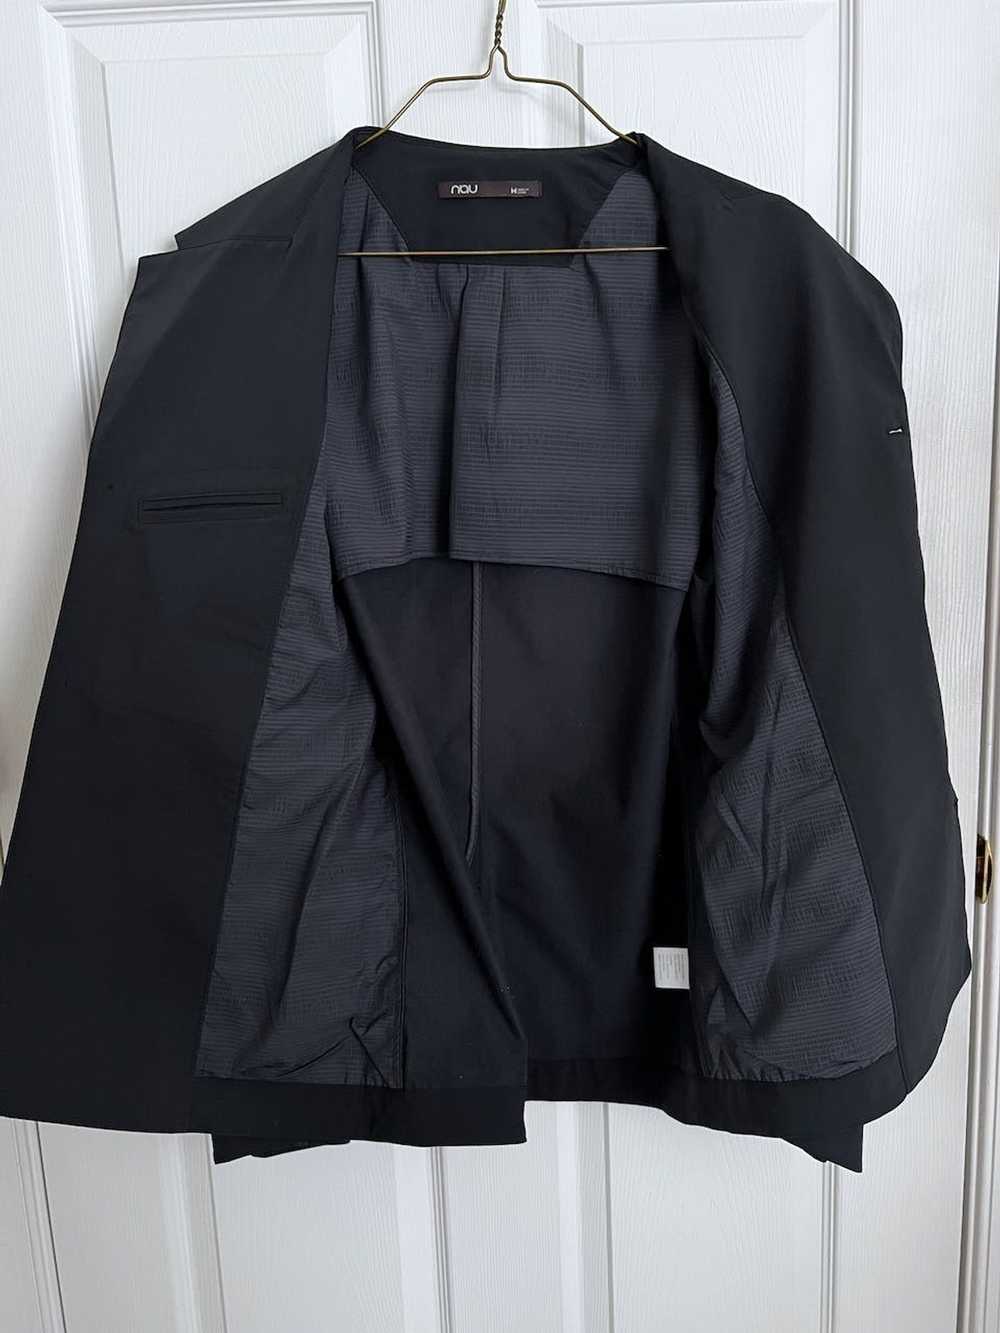 Nau Stretch Recycled Polyester Commuter Jacket - image 8